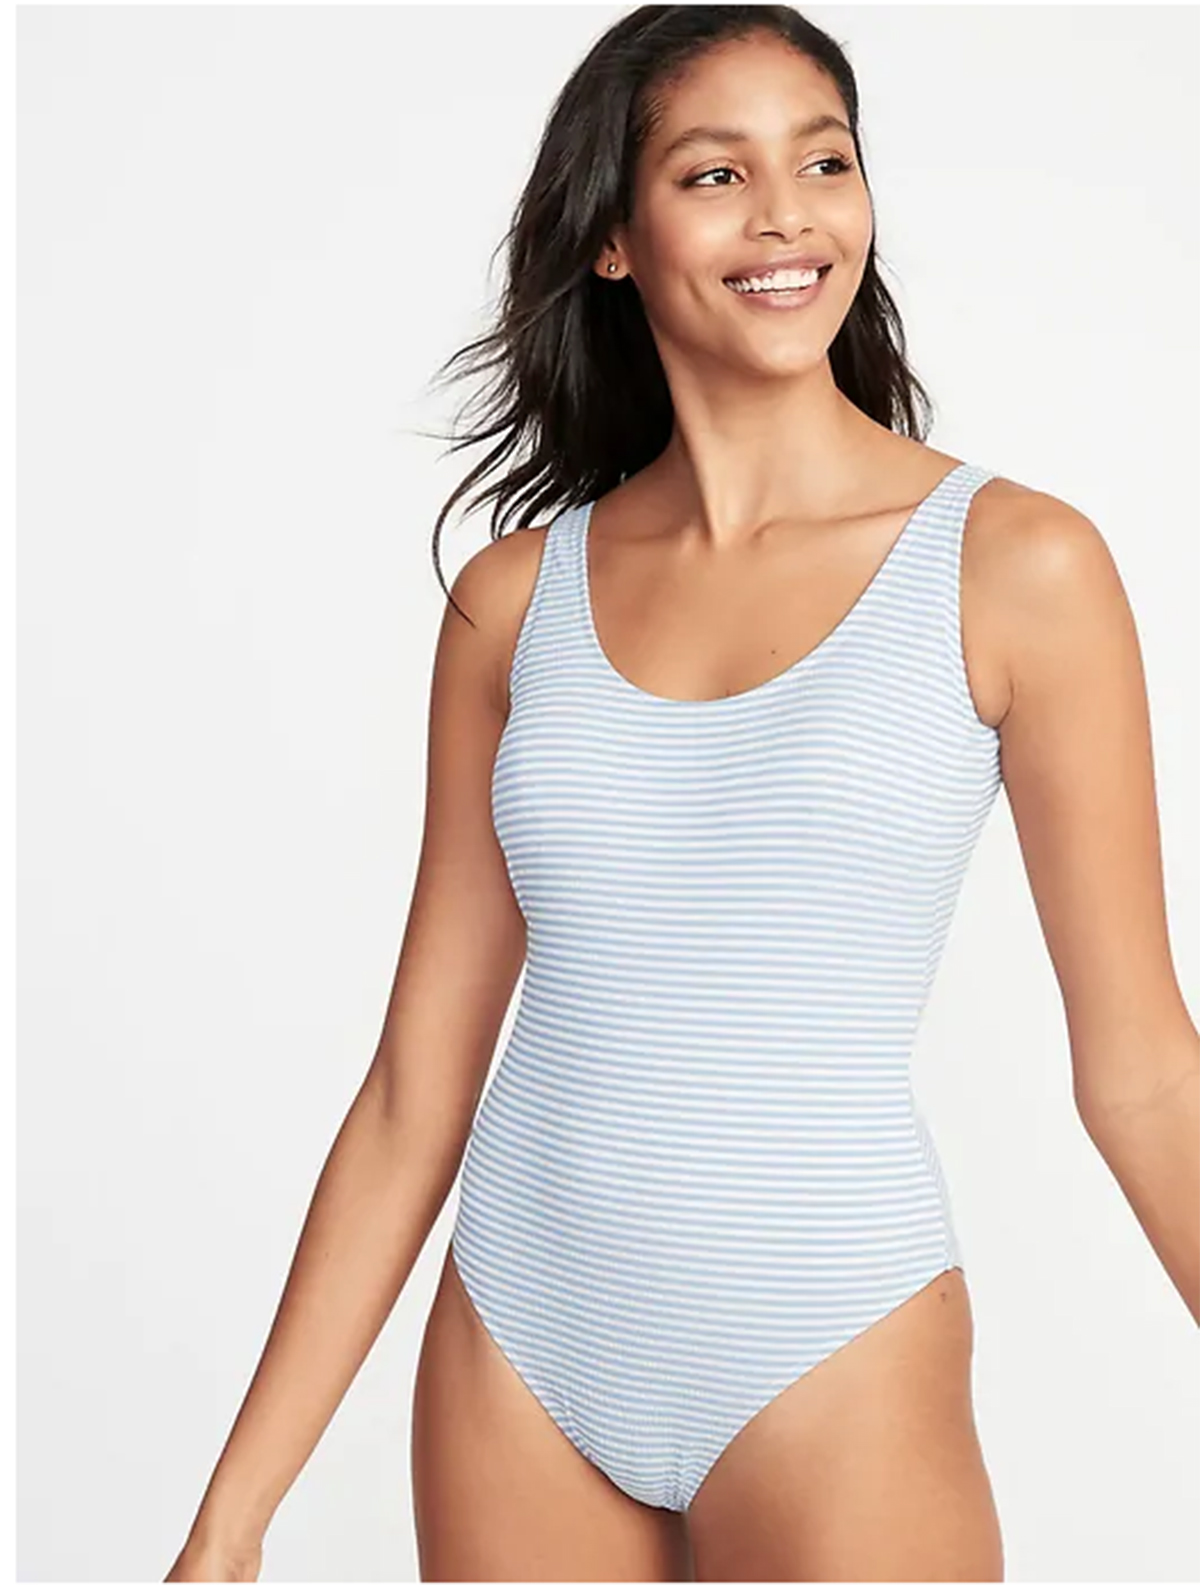 Old Navy Women's Swim | Old Navy old navy bathing suits Shop Clot...